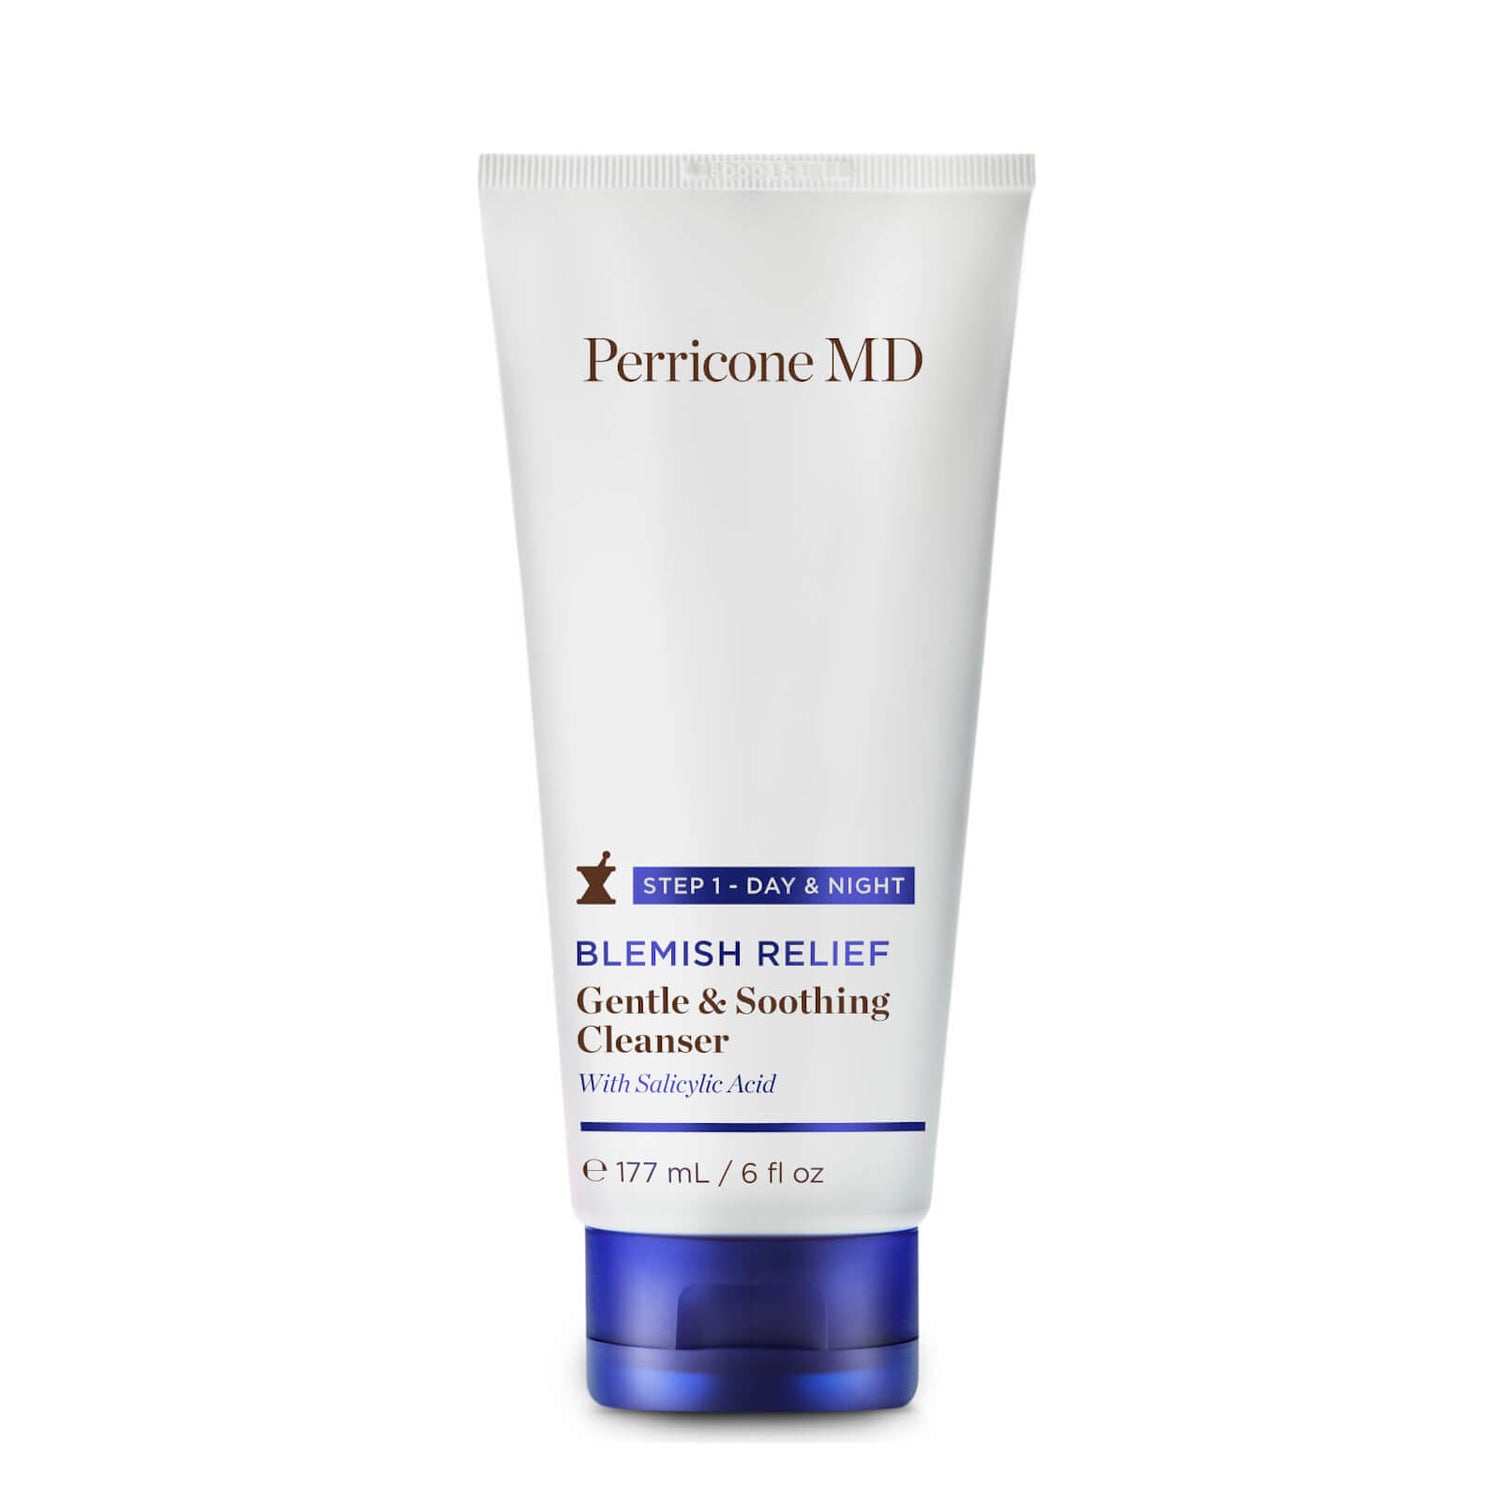 Perricone MD Blemish Relief Gentle and Soothing Cleanser 177ml